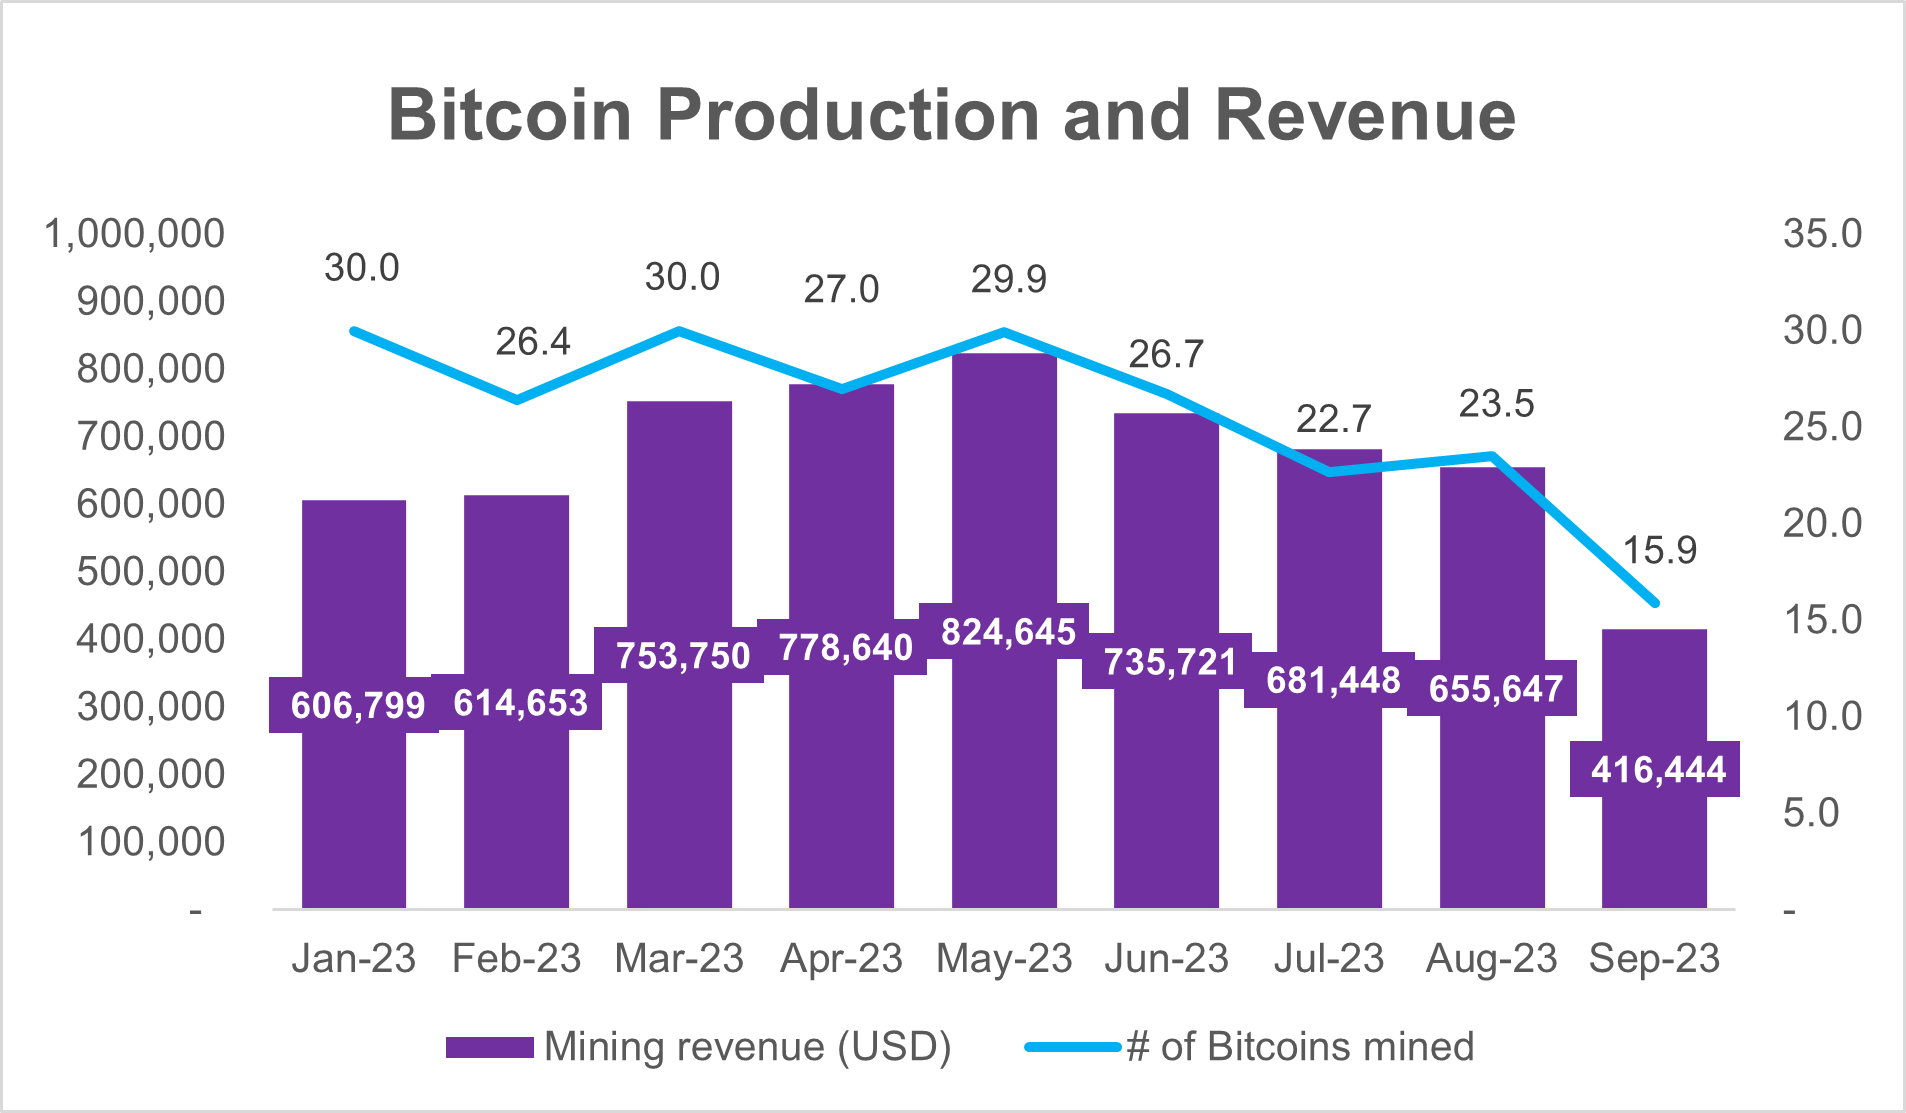 15.9 Bitcoins Mined and Revenue of US<money>$416,444</money>